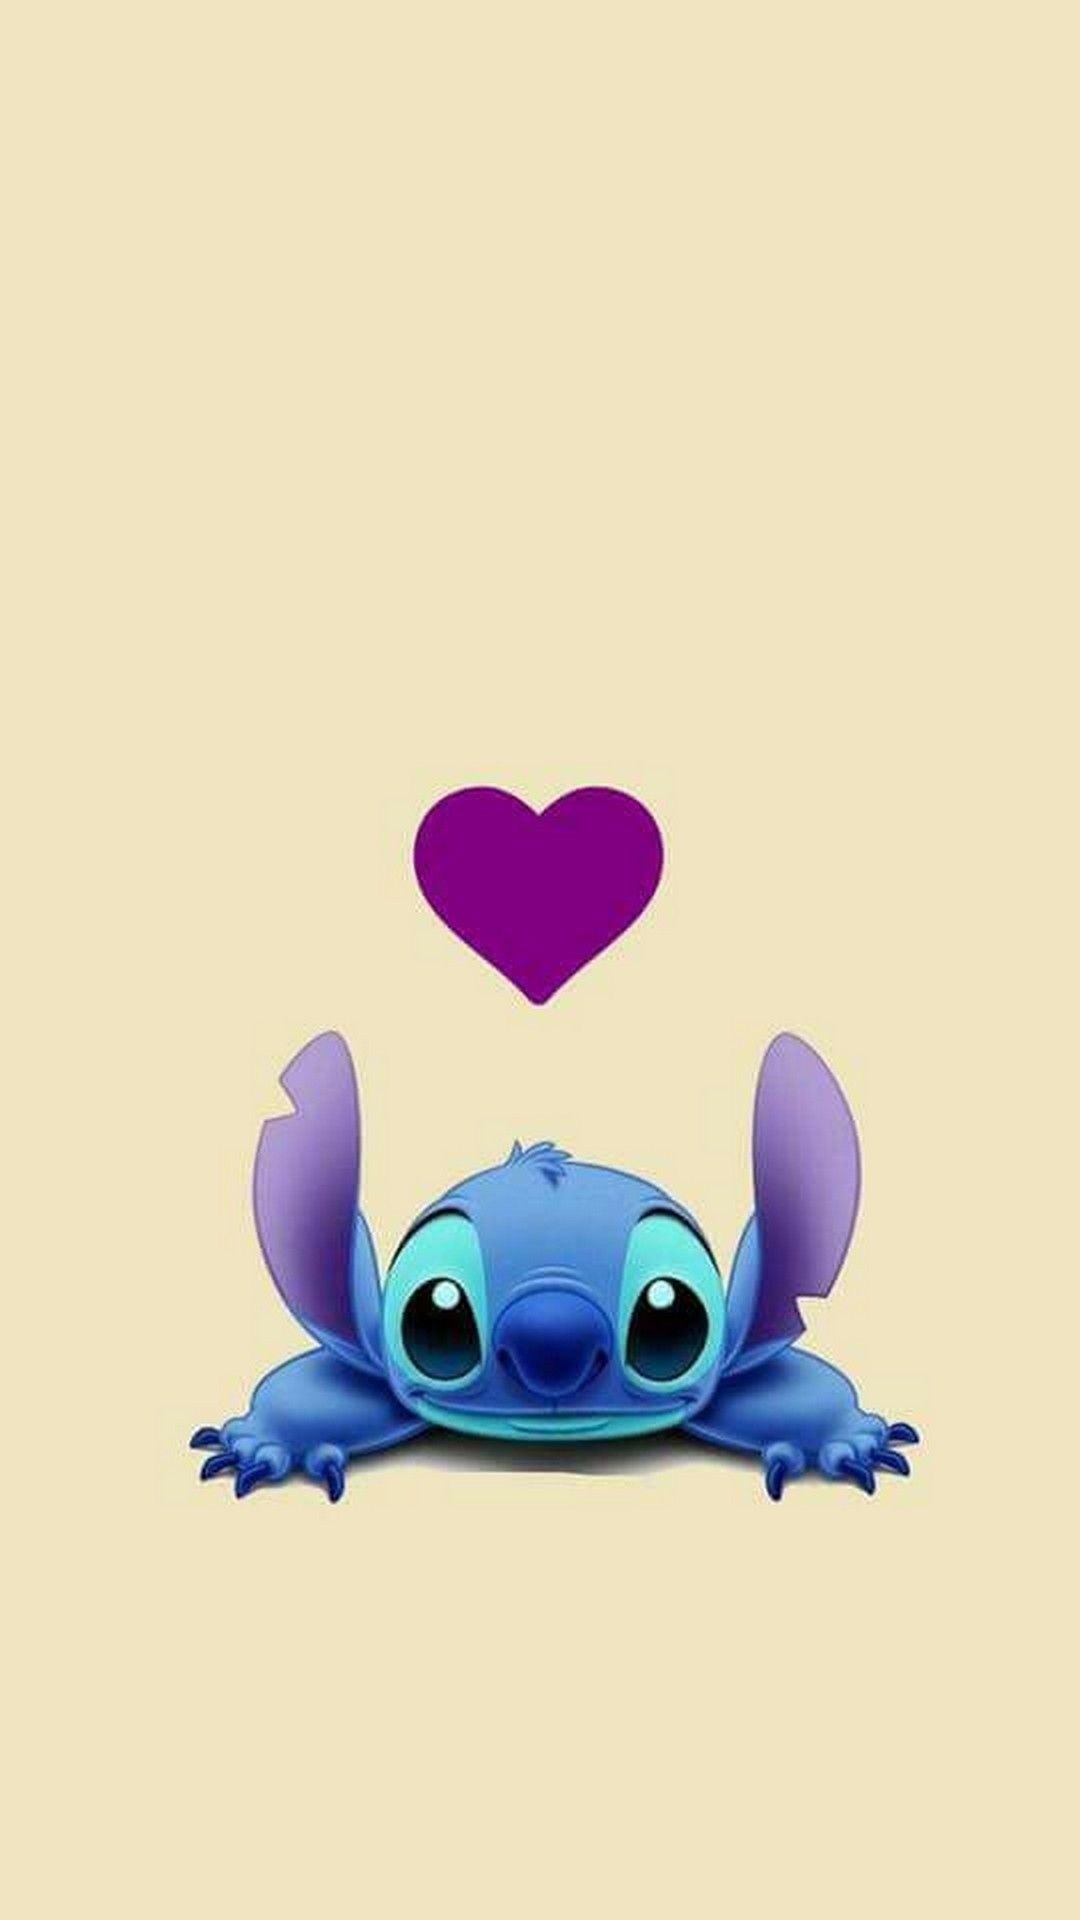 Stitch wallpaper for iphone